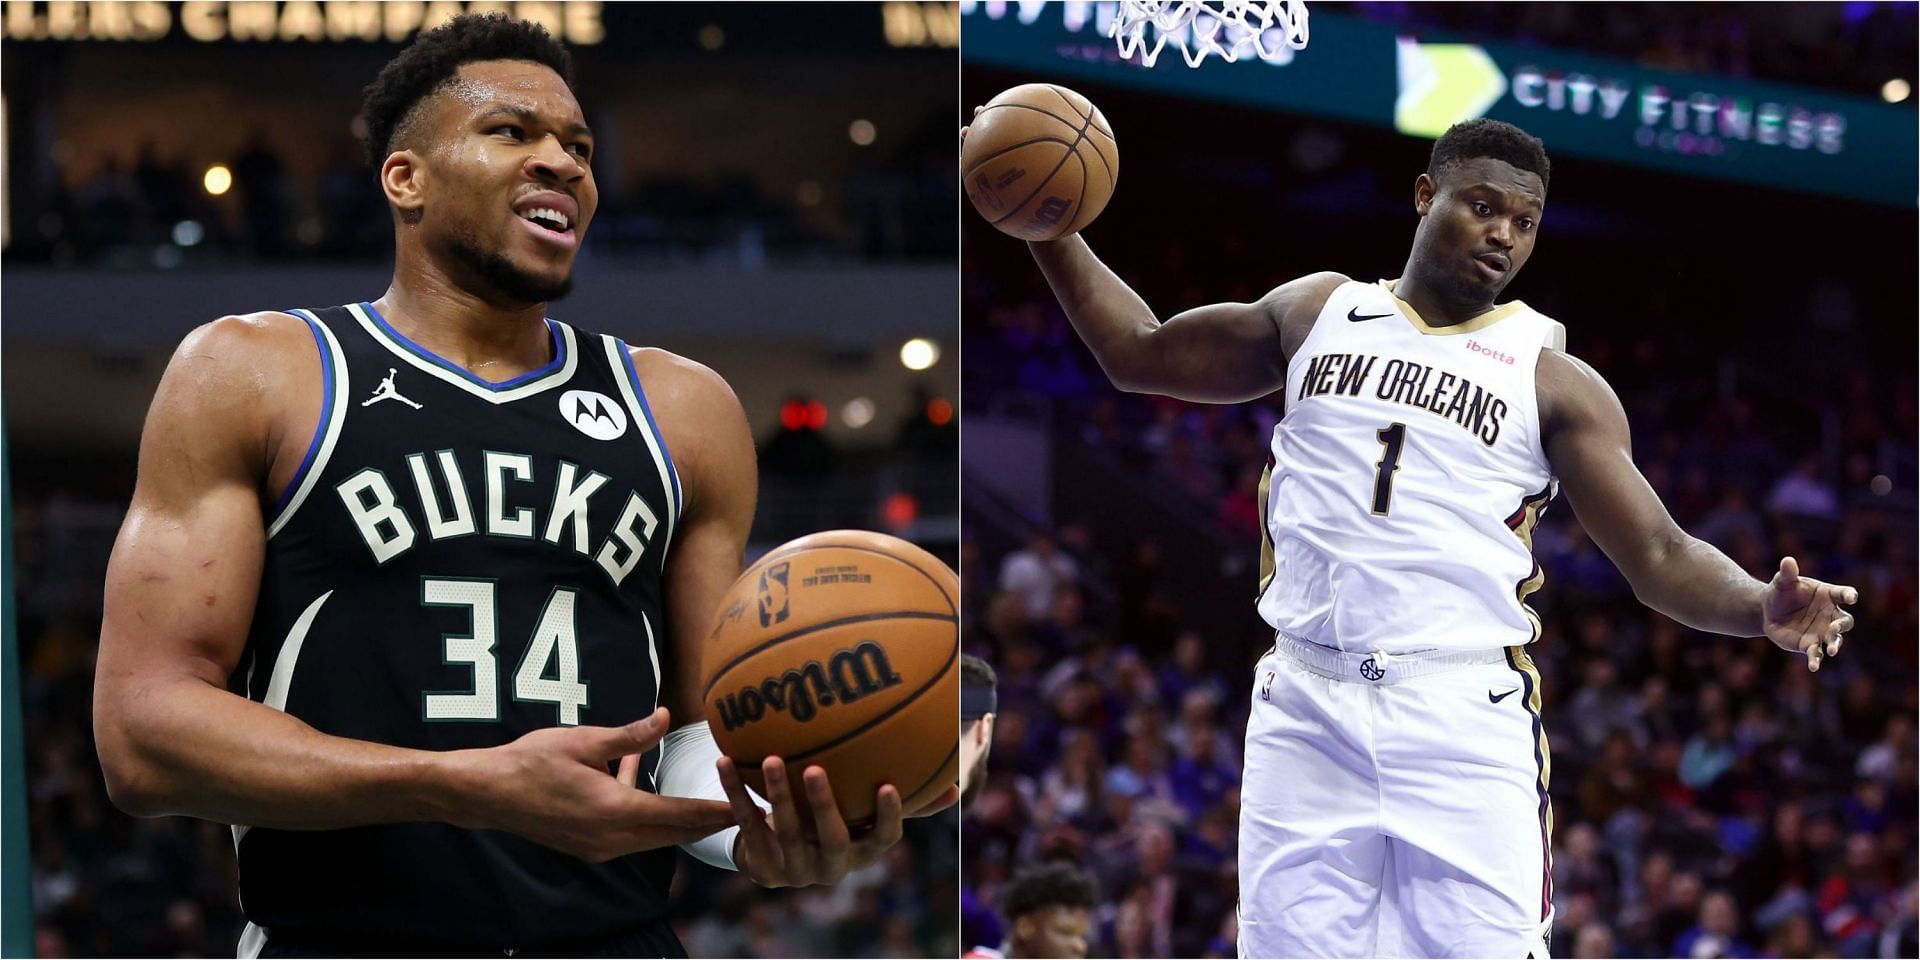 Milwaukee Bucks vs New Orleans Pelicans Starting Lineups and Depth Charts